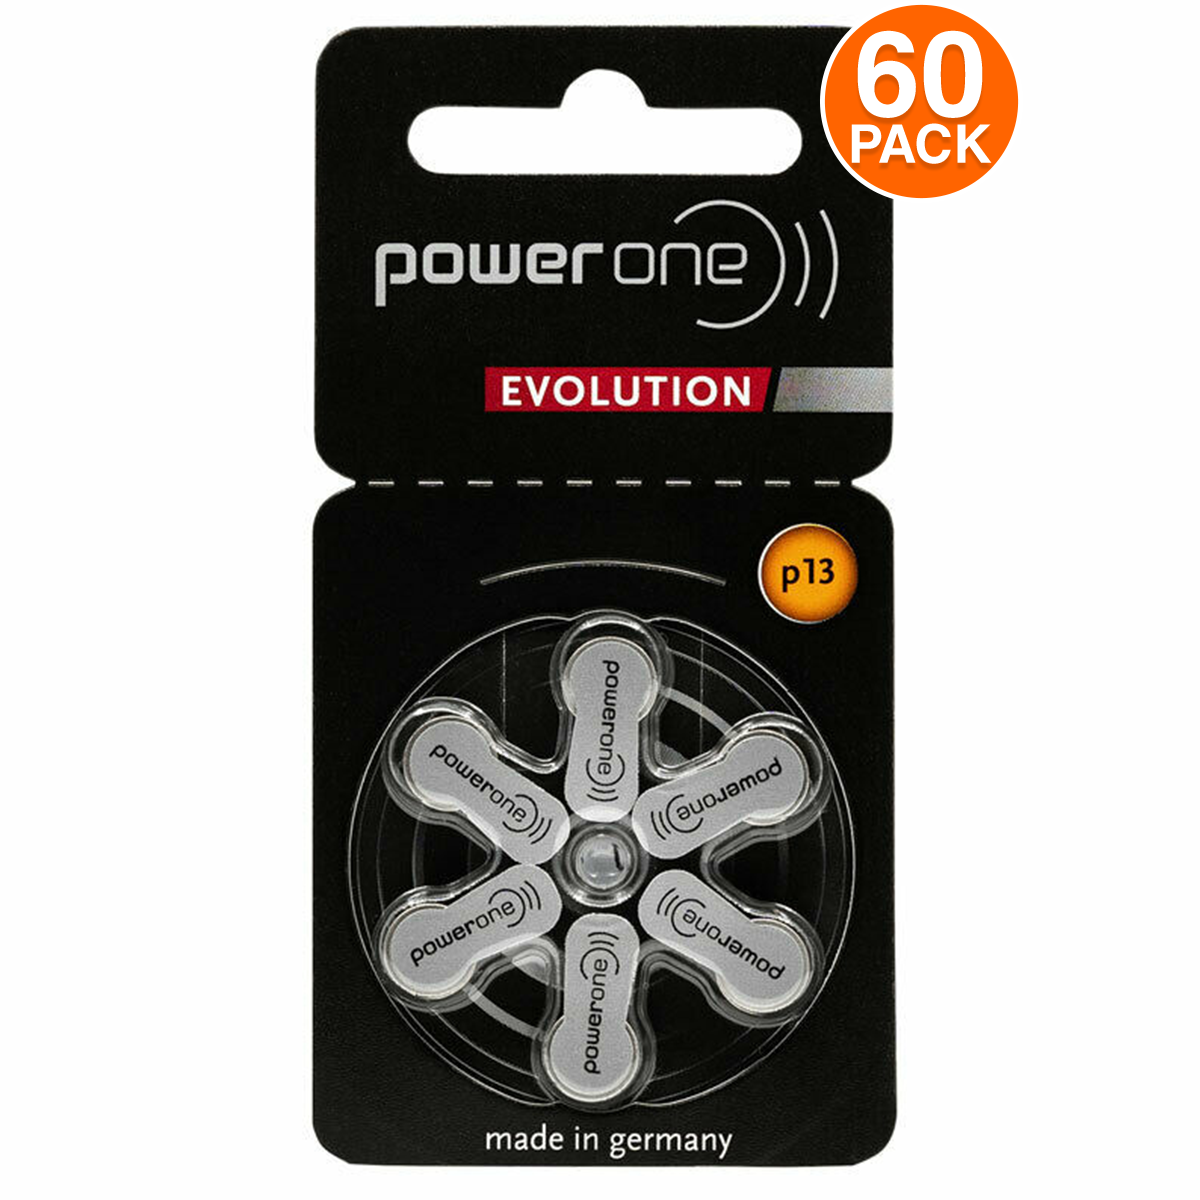 Power One Evolution Size 13 Hearing Aid Batteries (60 PCS)